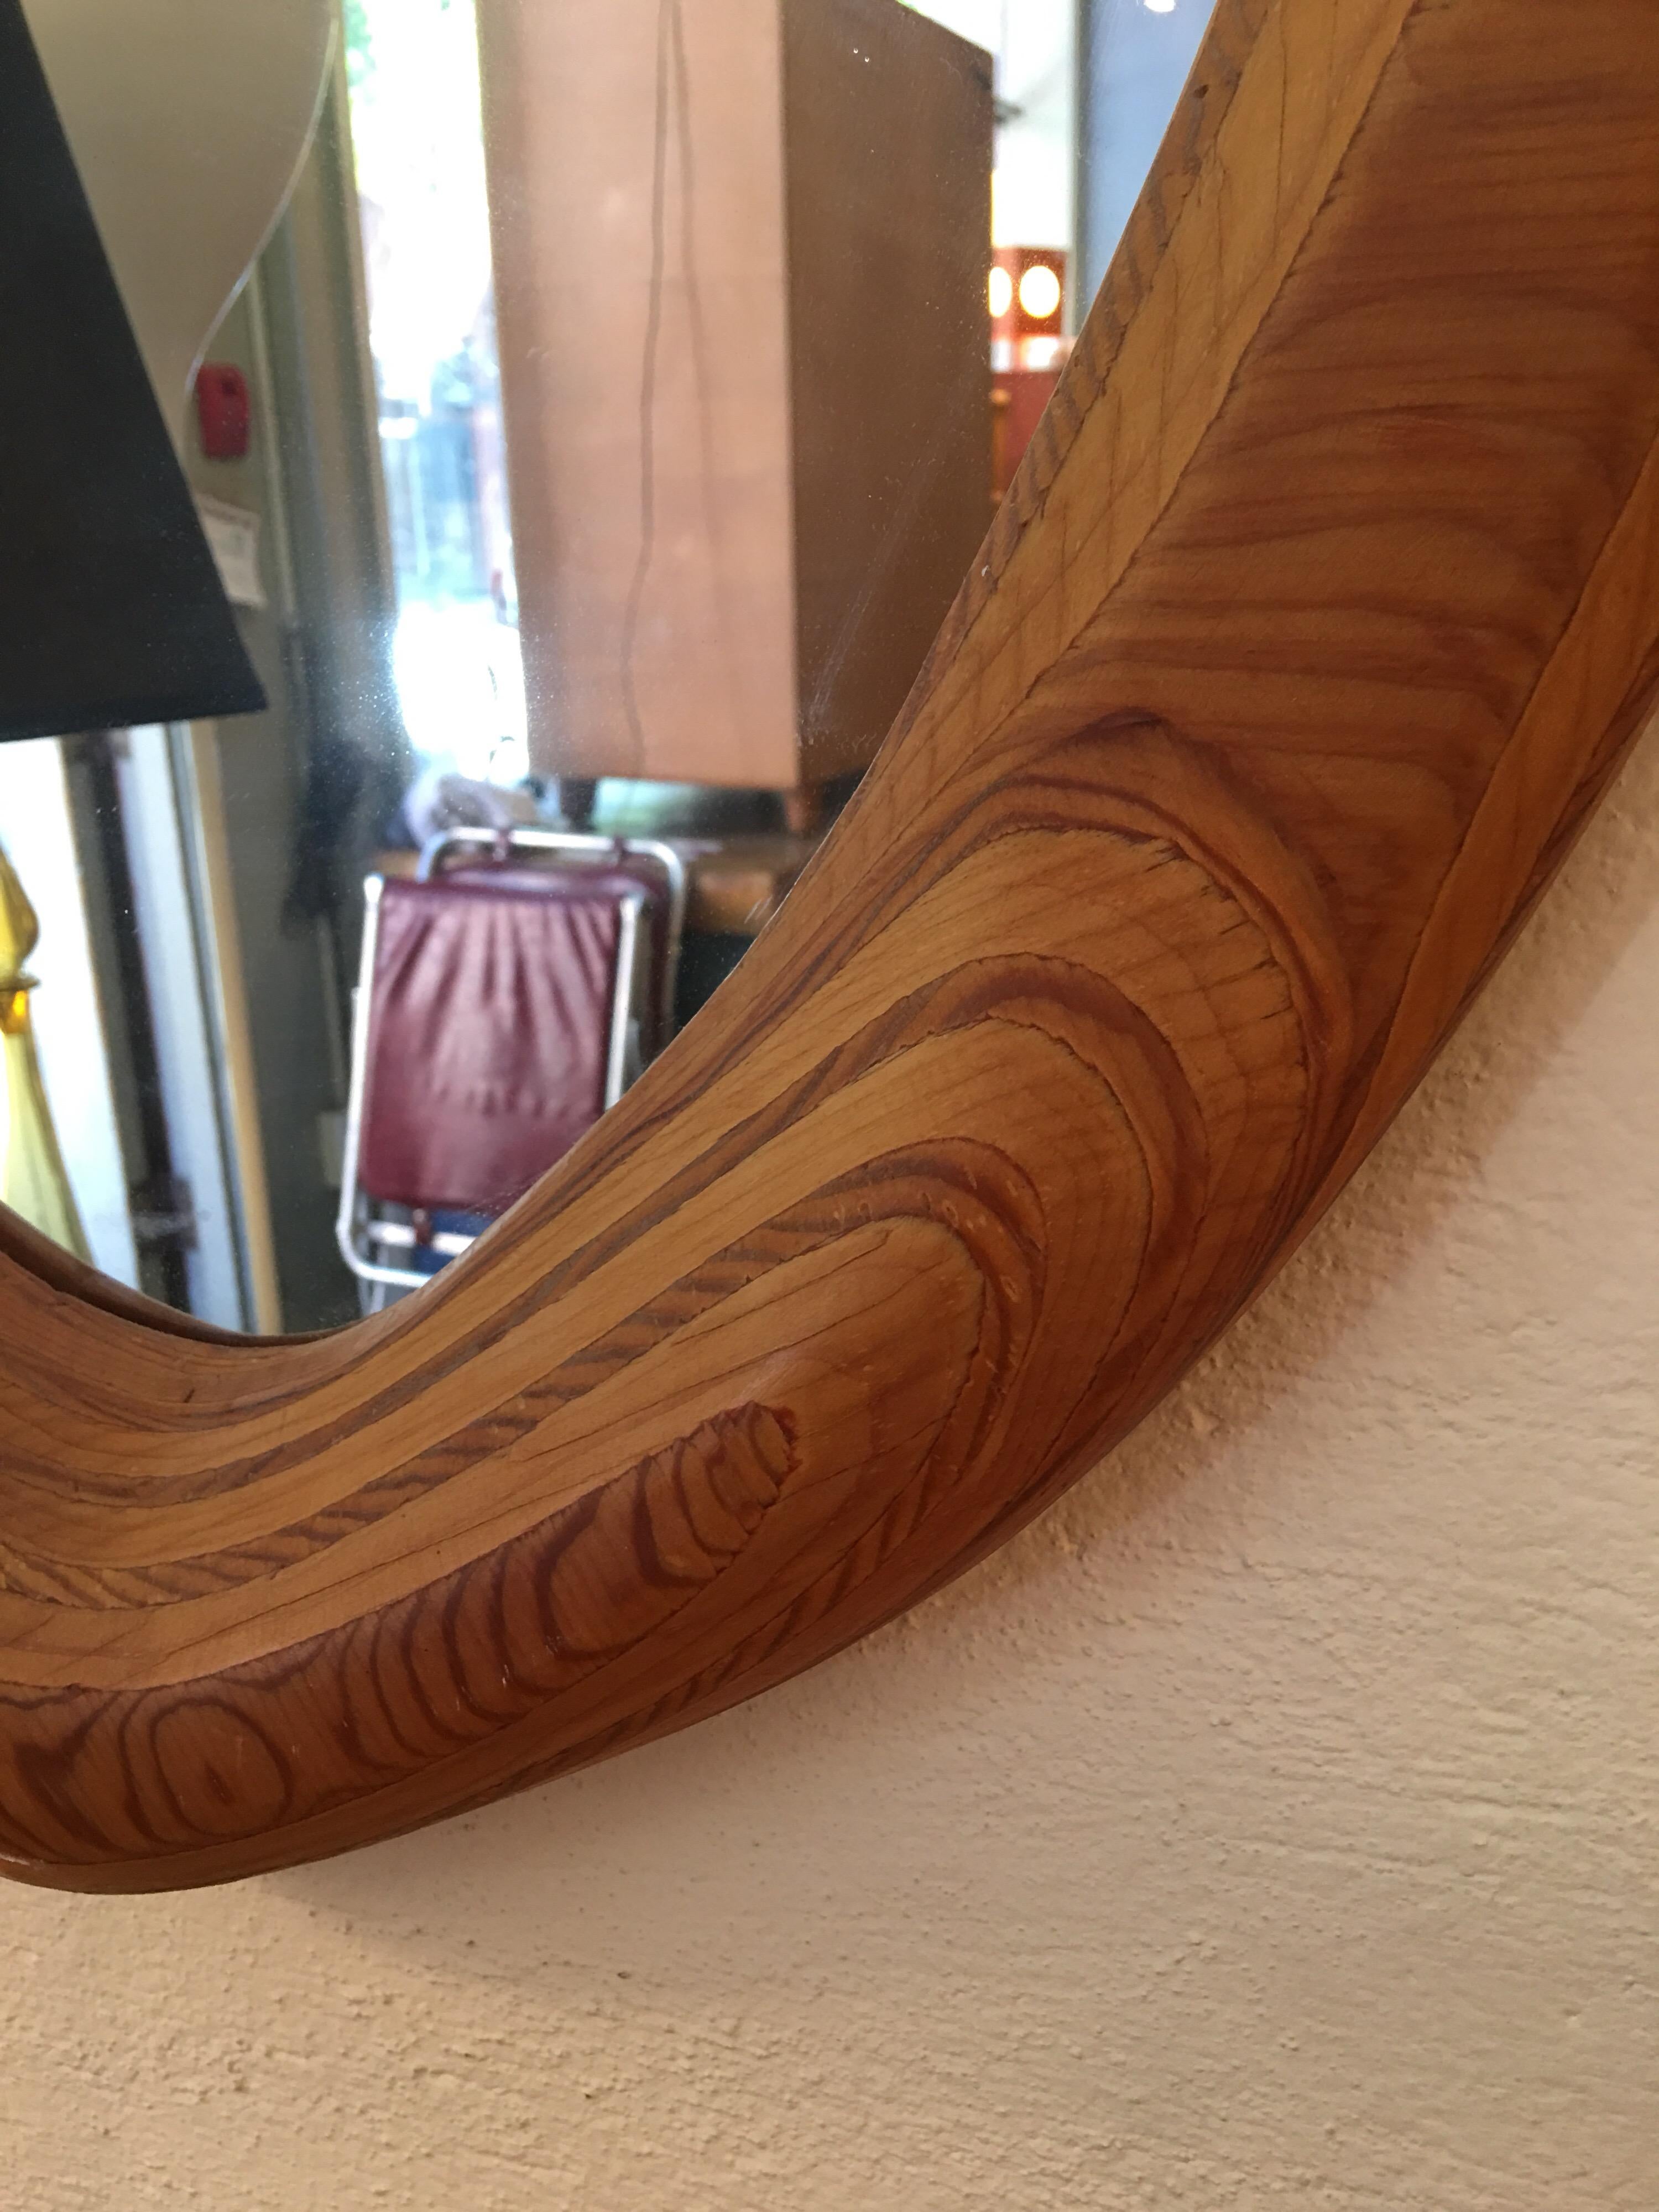 Unusual Plywood Mirror that has been sanded and ground in some areas to reveal contours of layered wood.